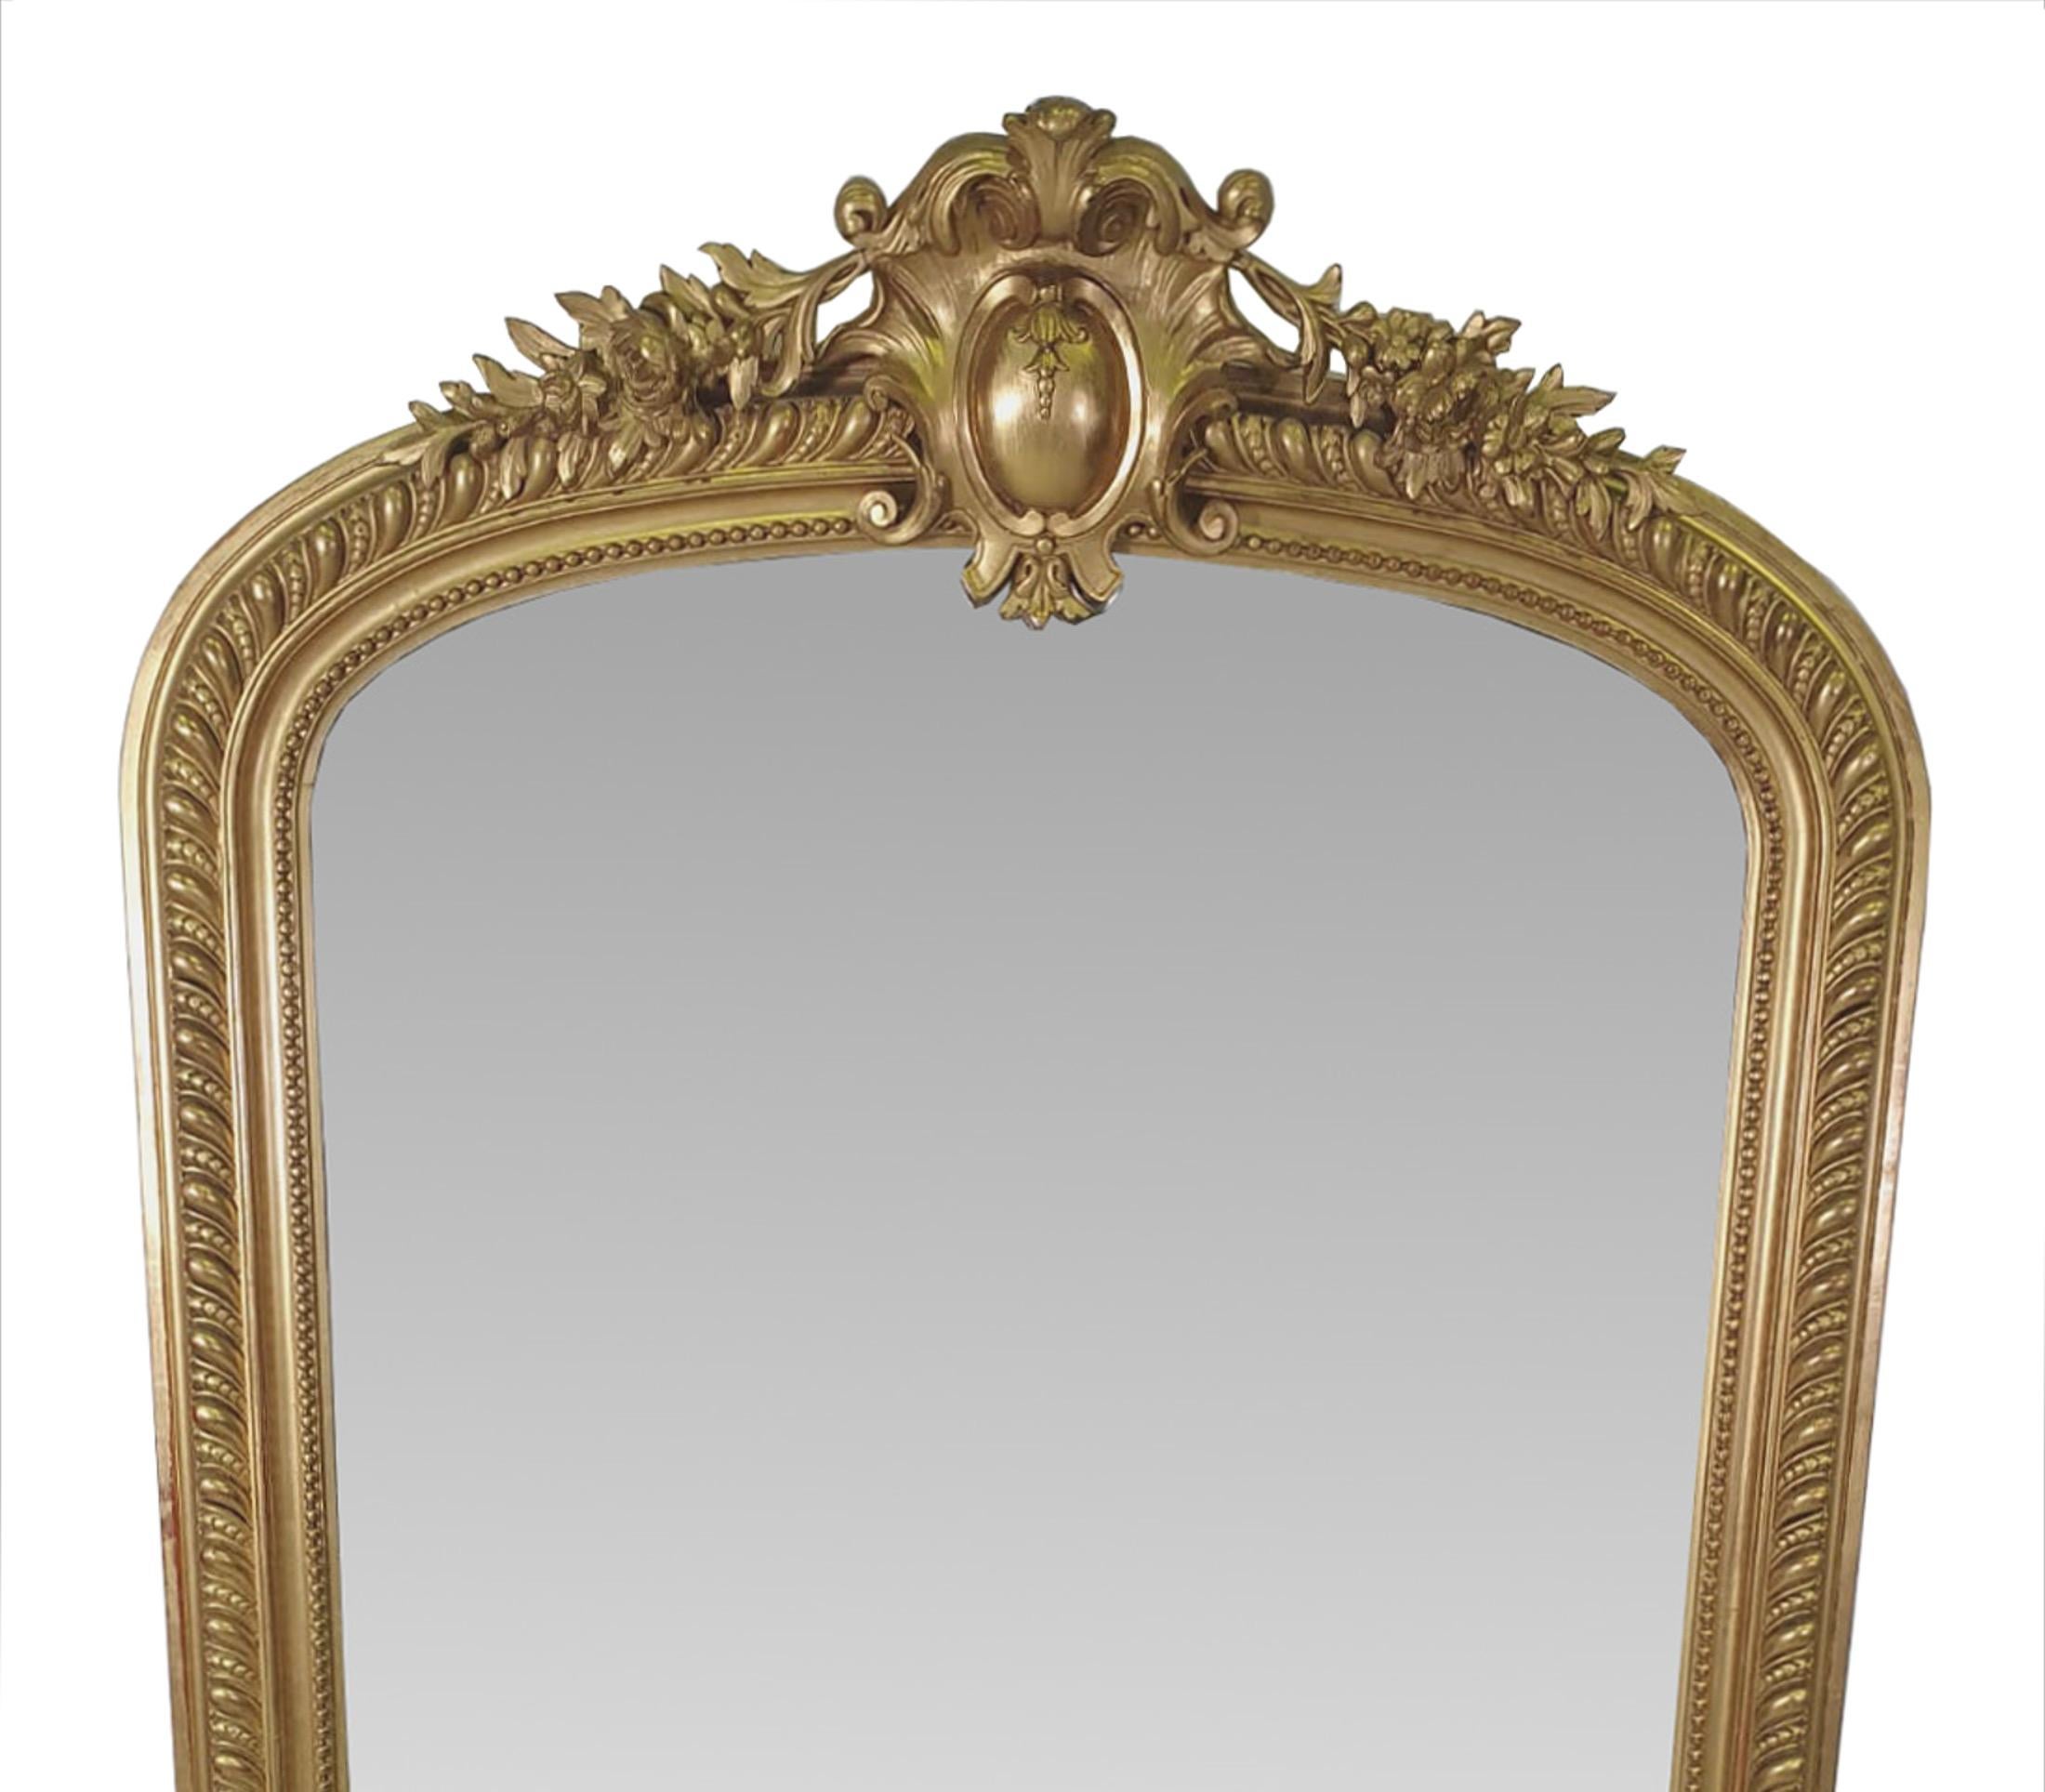 A beautiful 19th Century tall and Narrow giltwood overmantel mirror,  The hand carved gilt wood frame with scrolling foliate, beading and gadroon detail, surmounted with intricately carved crest with flower head, c-scroll and trailing foliate and